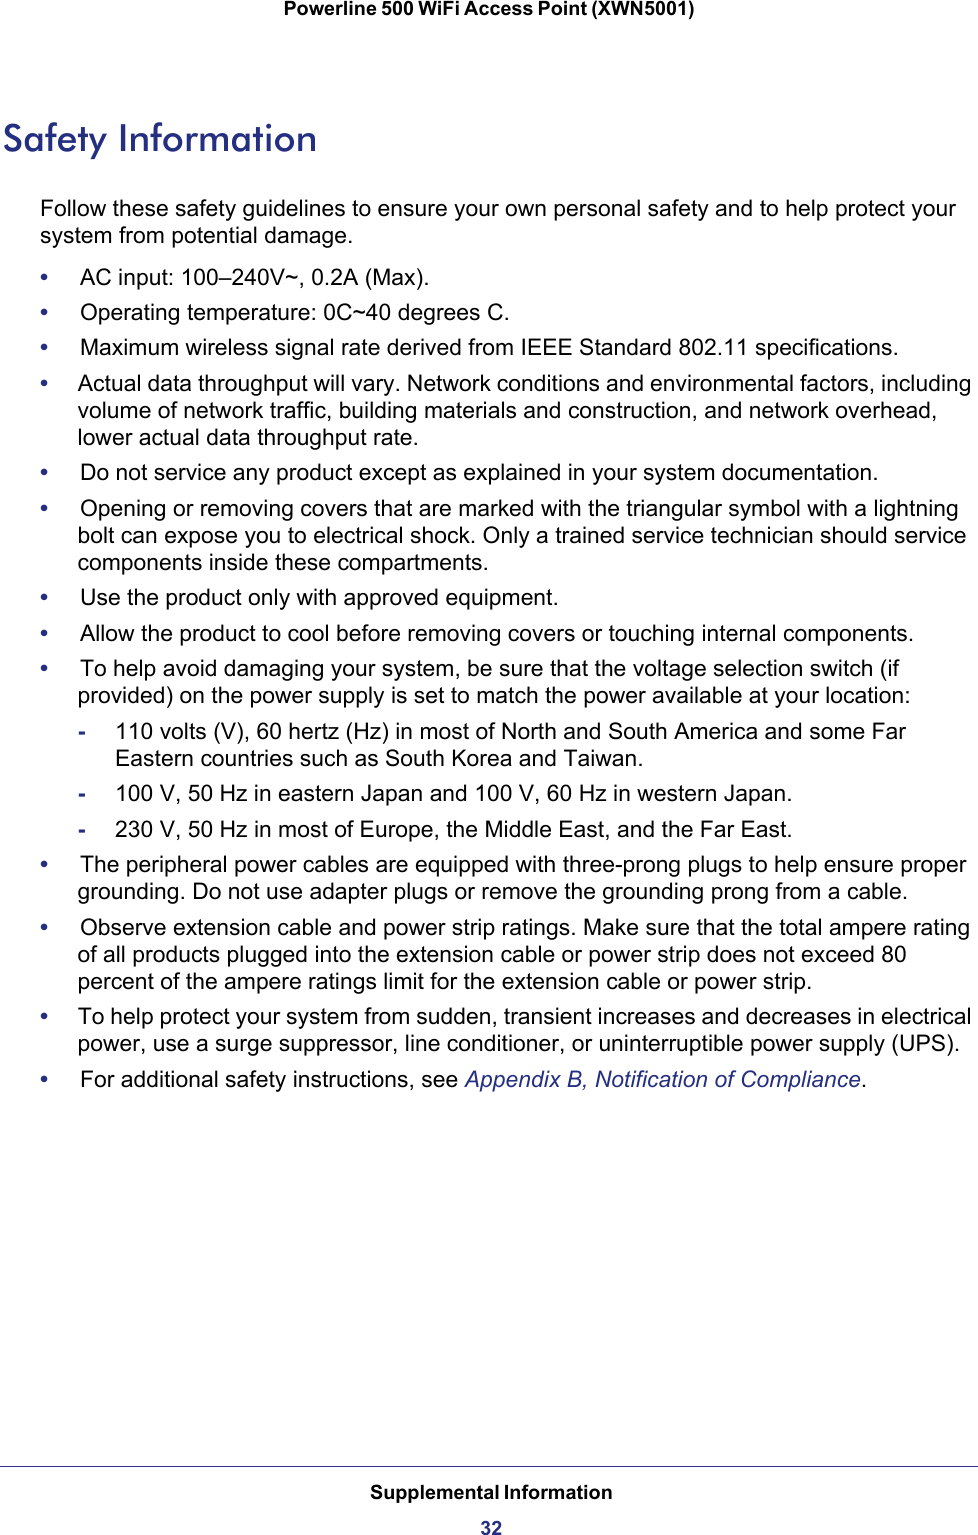 Supplemental Information32Powerline 500 WiFi Access Point (XWN5001)Safety InformationFollow these safety guidelines to ensure your own personal safety and to help protect your system from potential damage.•     AC input: 100–240V~, 0.2A (Max).•     Operating temperature: 0C~40 degrees C.•     Maximum wireless signal rate derived from IEEE Standard 802.11 specifications.•     Actual data throughput will vary. Network conditions and environmental factors, including volume of network traffic, building materials and construction, and network overhead, lower actual data throughput rate.•     Do not service any product except as explained in your system documentation.•     Opening or removing covers that are marked with the triangular symbol with a lightning bolt can expose you to electrical shock. Only a trained service technician should service components inside these compartments.•     Use the product only with approved equipment.•     Allow the product to cool before removing covers or touching internal components.•     To help avoid damaging your system, be sure that the voltage selection switch (if provided) on the power supply is set to match the power available at your location:-110 volts (V), 60 hertz (Hz) in most of North and South America and some Far Eastern countries such as South Korea and Taiwan.-100 V, 50 Hz in eastern Japan and 100 V, 60 Hz in western Japan.-230 V, 50 Hz in most of Europe, the Middle East, and the Far East.•     The peripheral power cables are equipped with three-prong plugs to help ensure proper grounding. Do not use adapter plugs or remove the grounding prong from a cable.•     Observe extension cable and power strip ratings. Make sure that the total ampere rating of all products plugged into the extension cable or power strip does not exceed 80 percent of the ampere ratings limit for the extension cable or power strip.•     To help protect your system from sudden, transient increases and decreases in electrical power, use a surge suppressor, line conditioner, or uninterruptible power supply (UPS).•     For additional safety instructions, see Appendix B, Notification of Compliance.